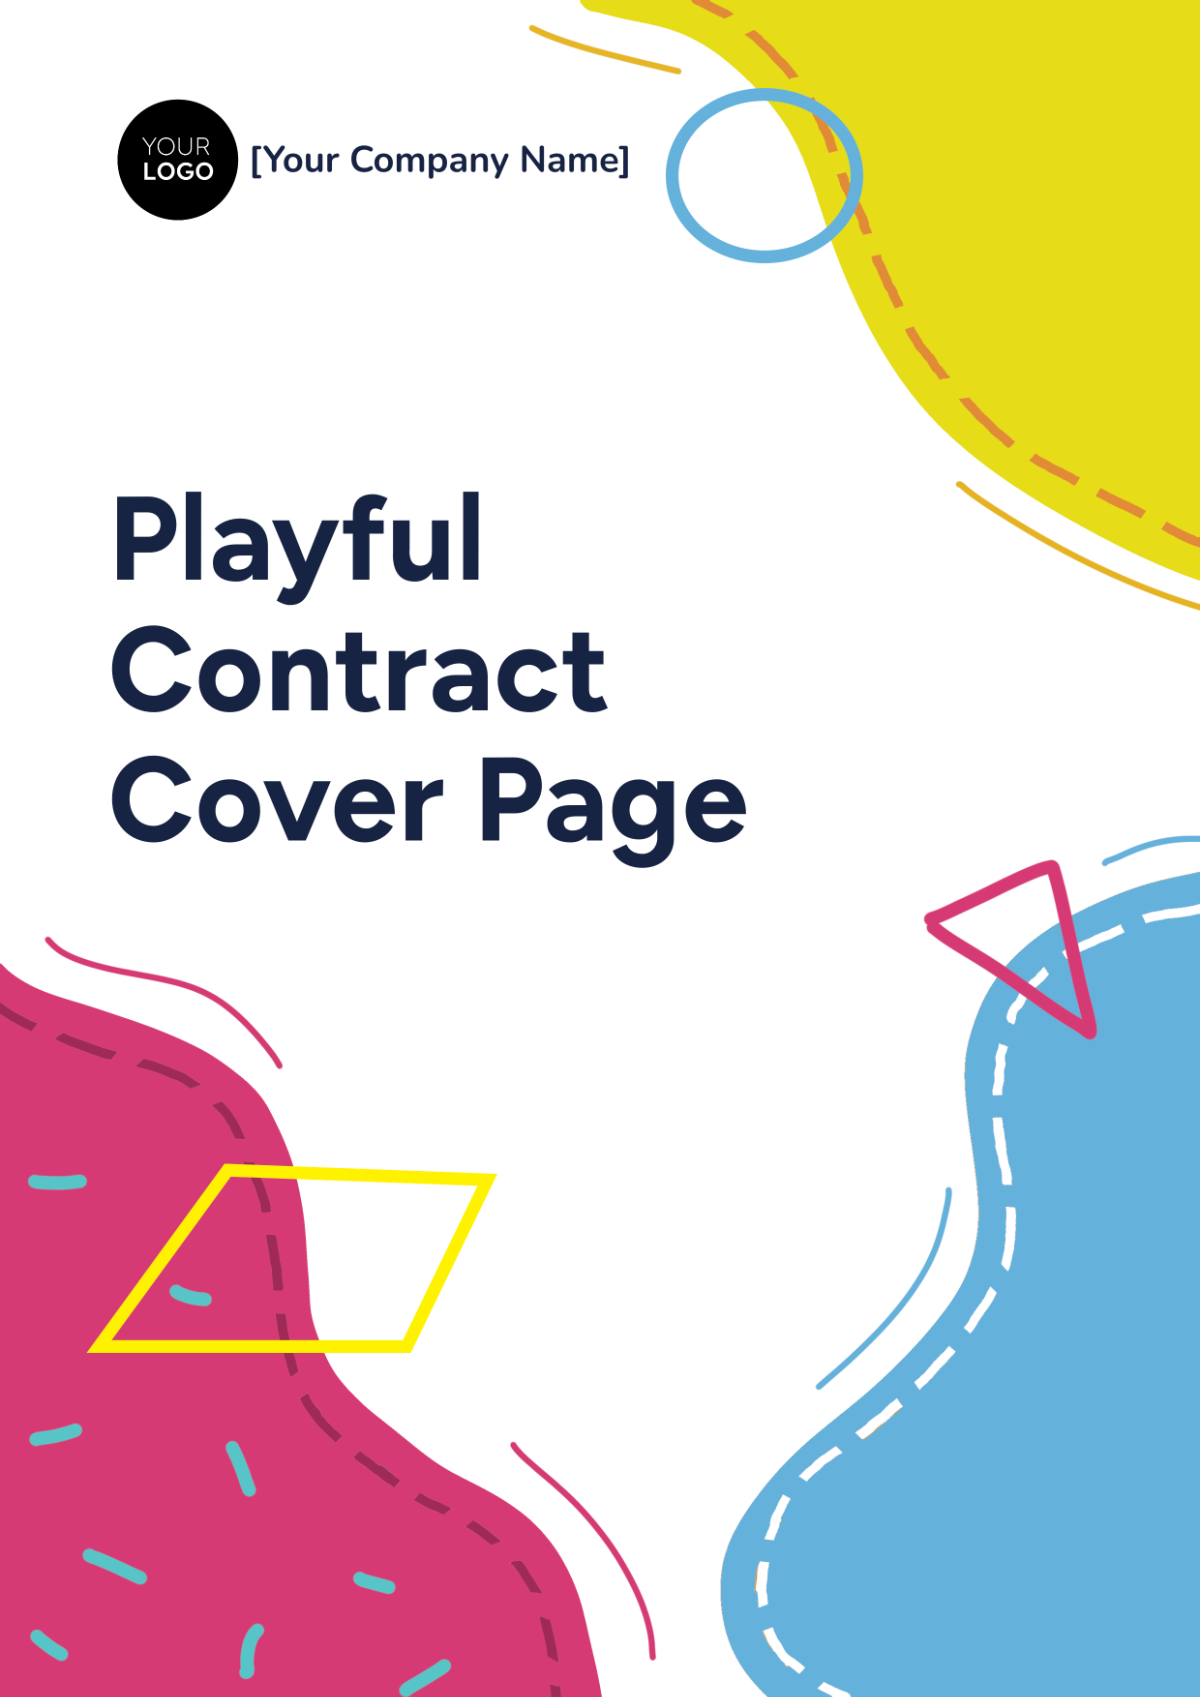 Playful Contract Cover Page Template